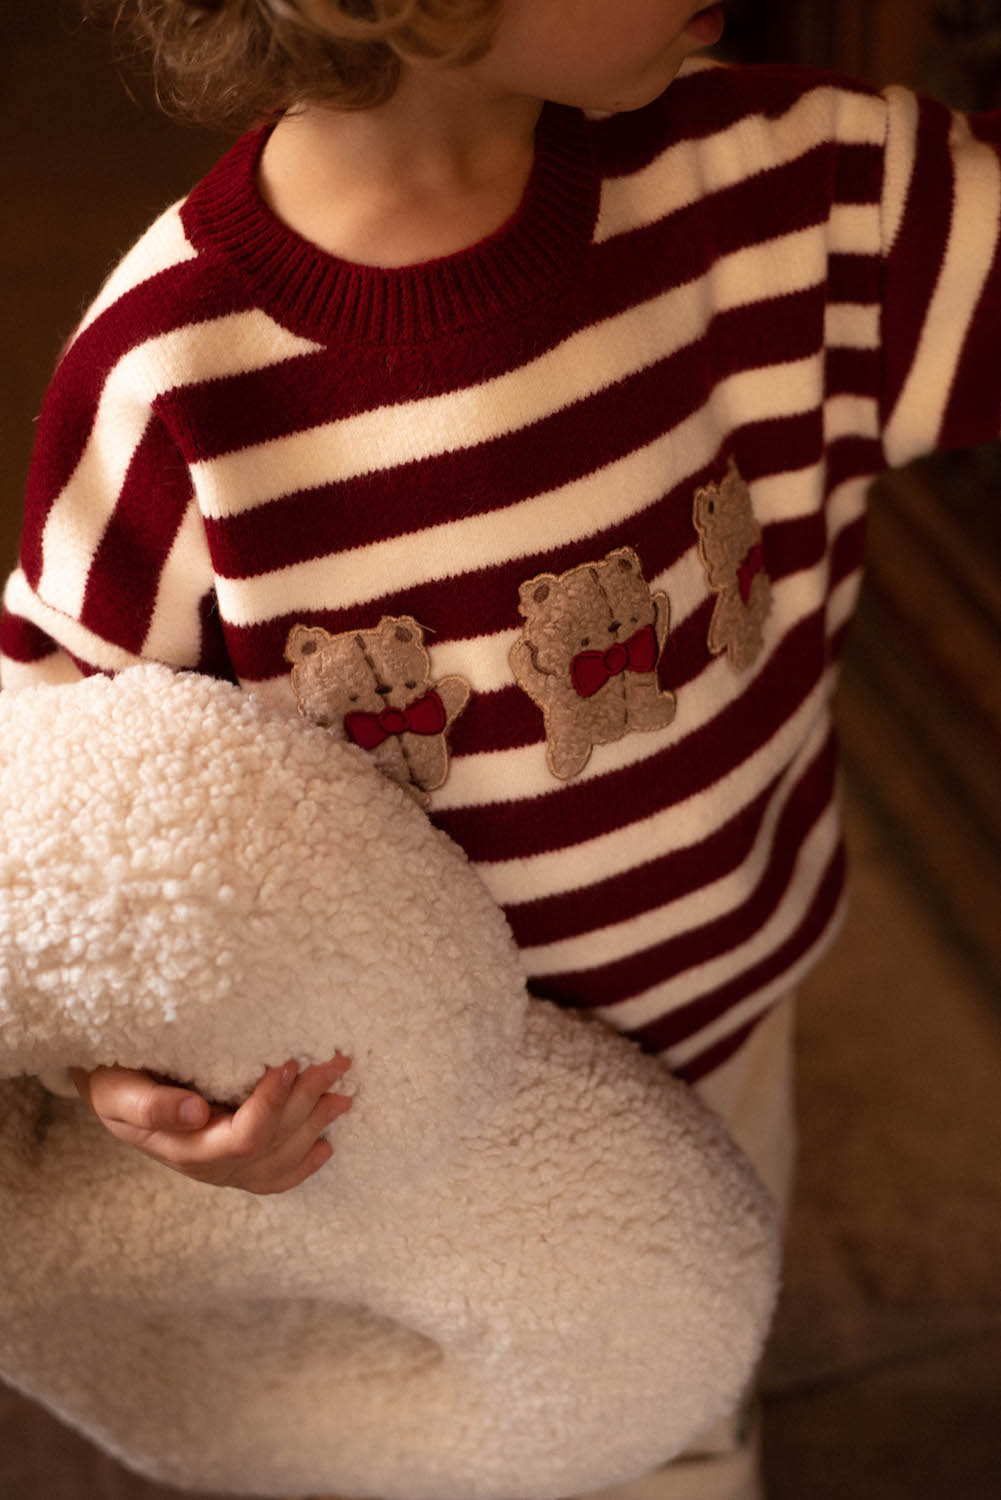 little kid holding boucle letter cushion in hands with red stripe sweater with bears